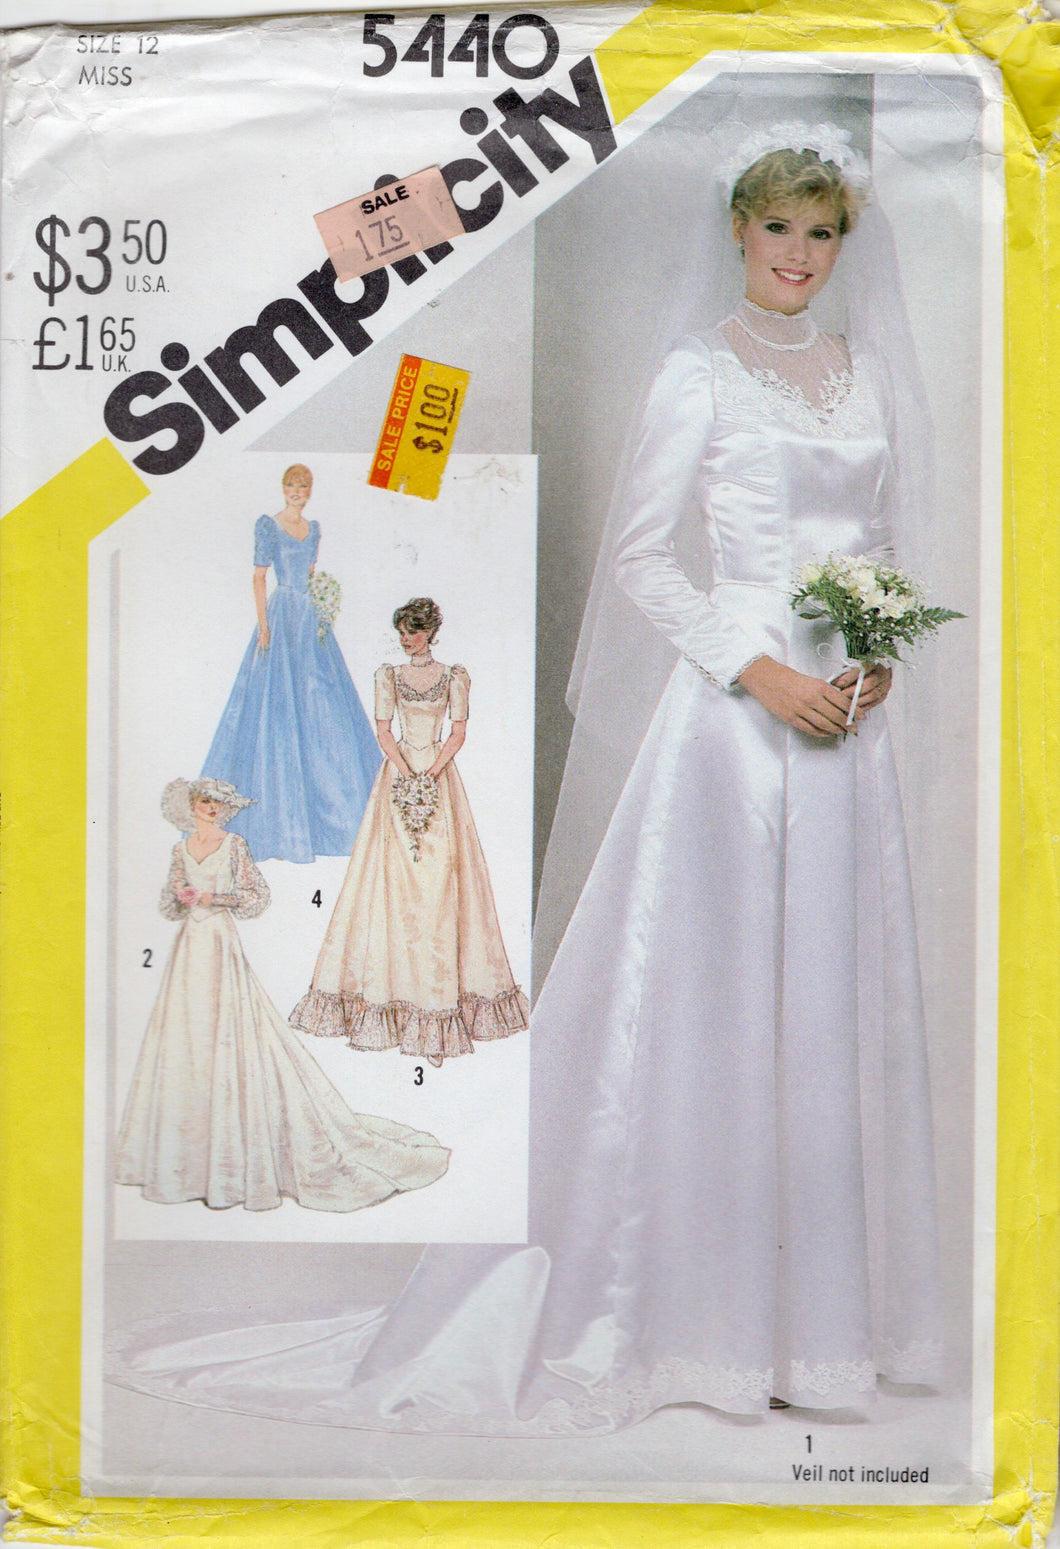 1980's Simplicity Wedding Dress with Sweetheart or High Neckline and optional train - Bust 34